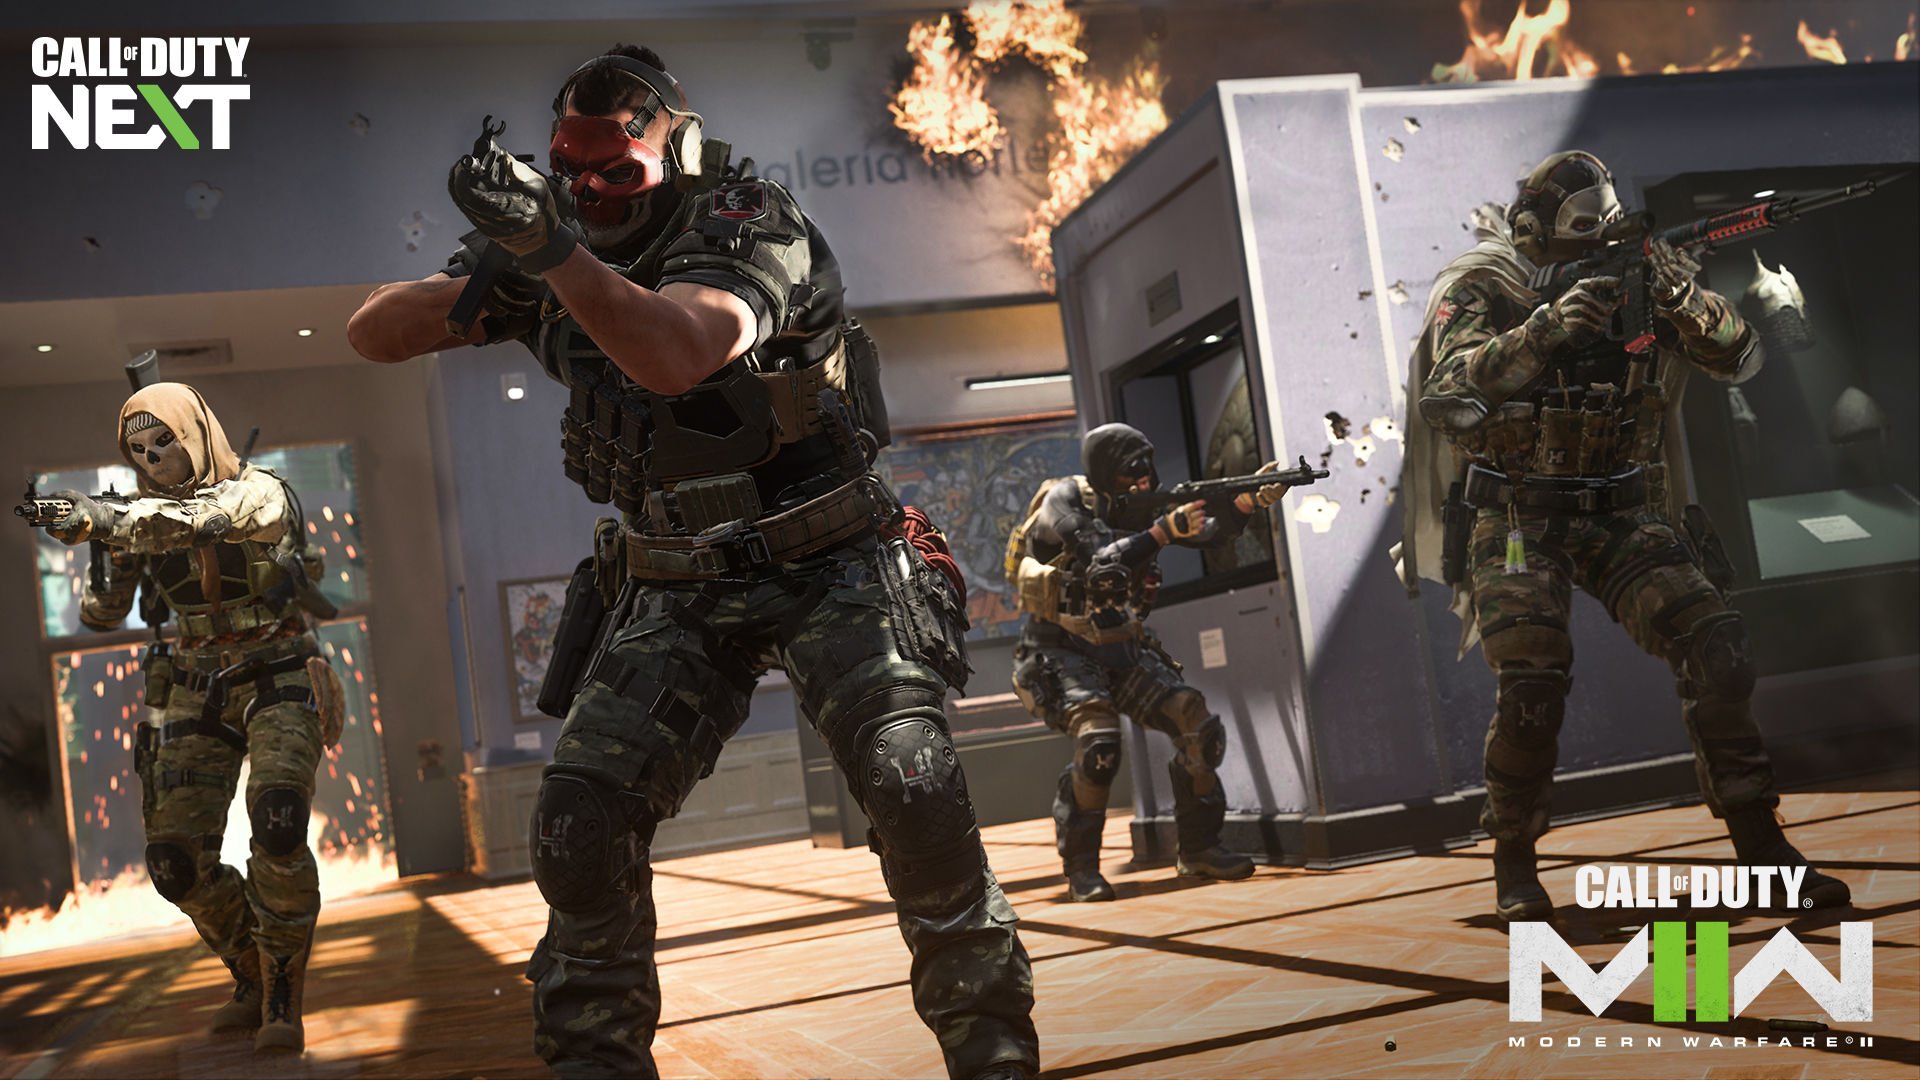 Call of Duty Warzone 2.0 and Modern Warfare II Details Revealed in COD Next